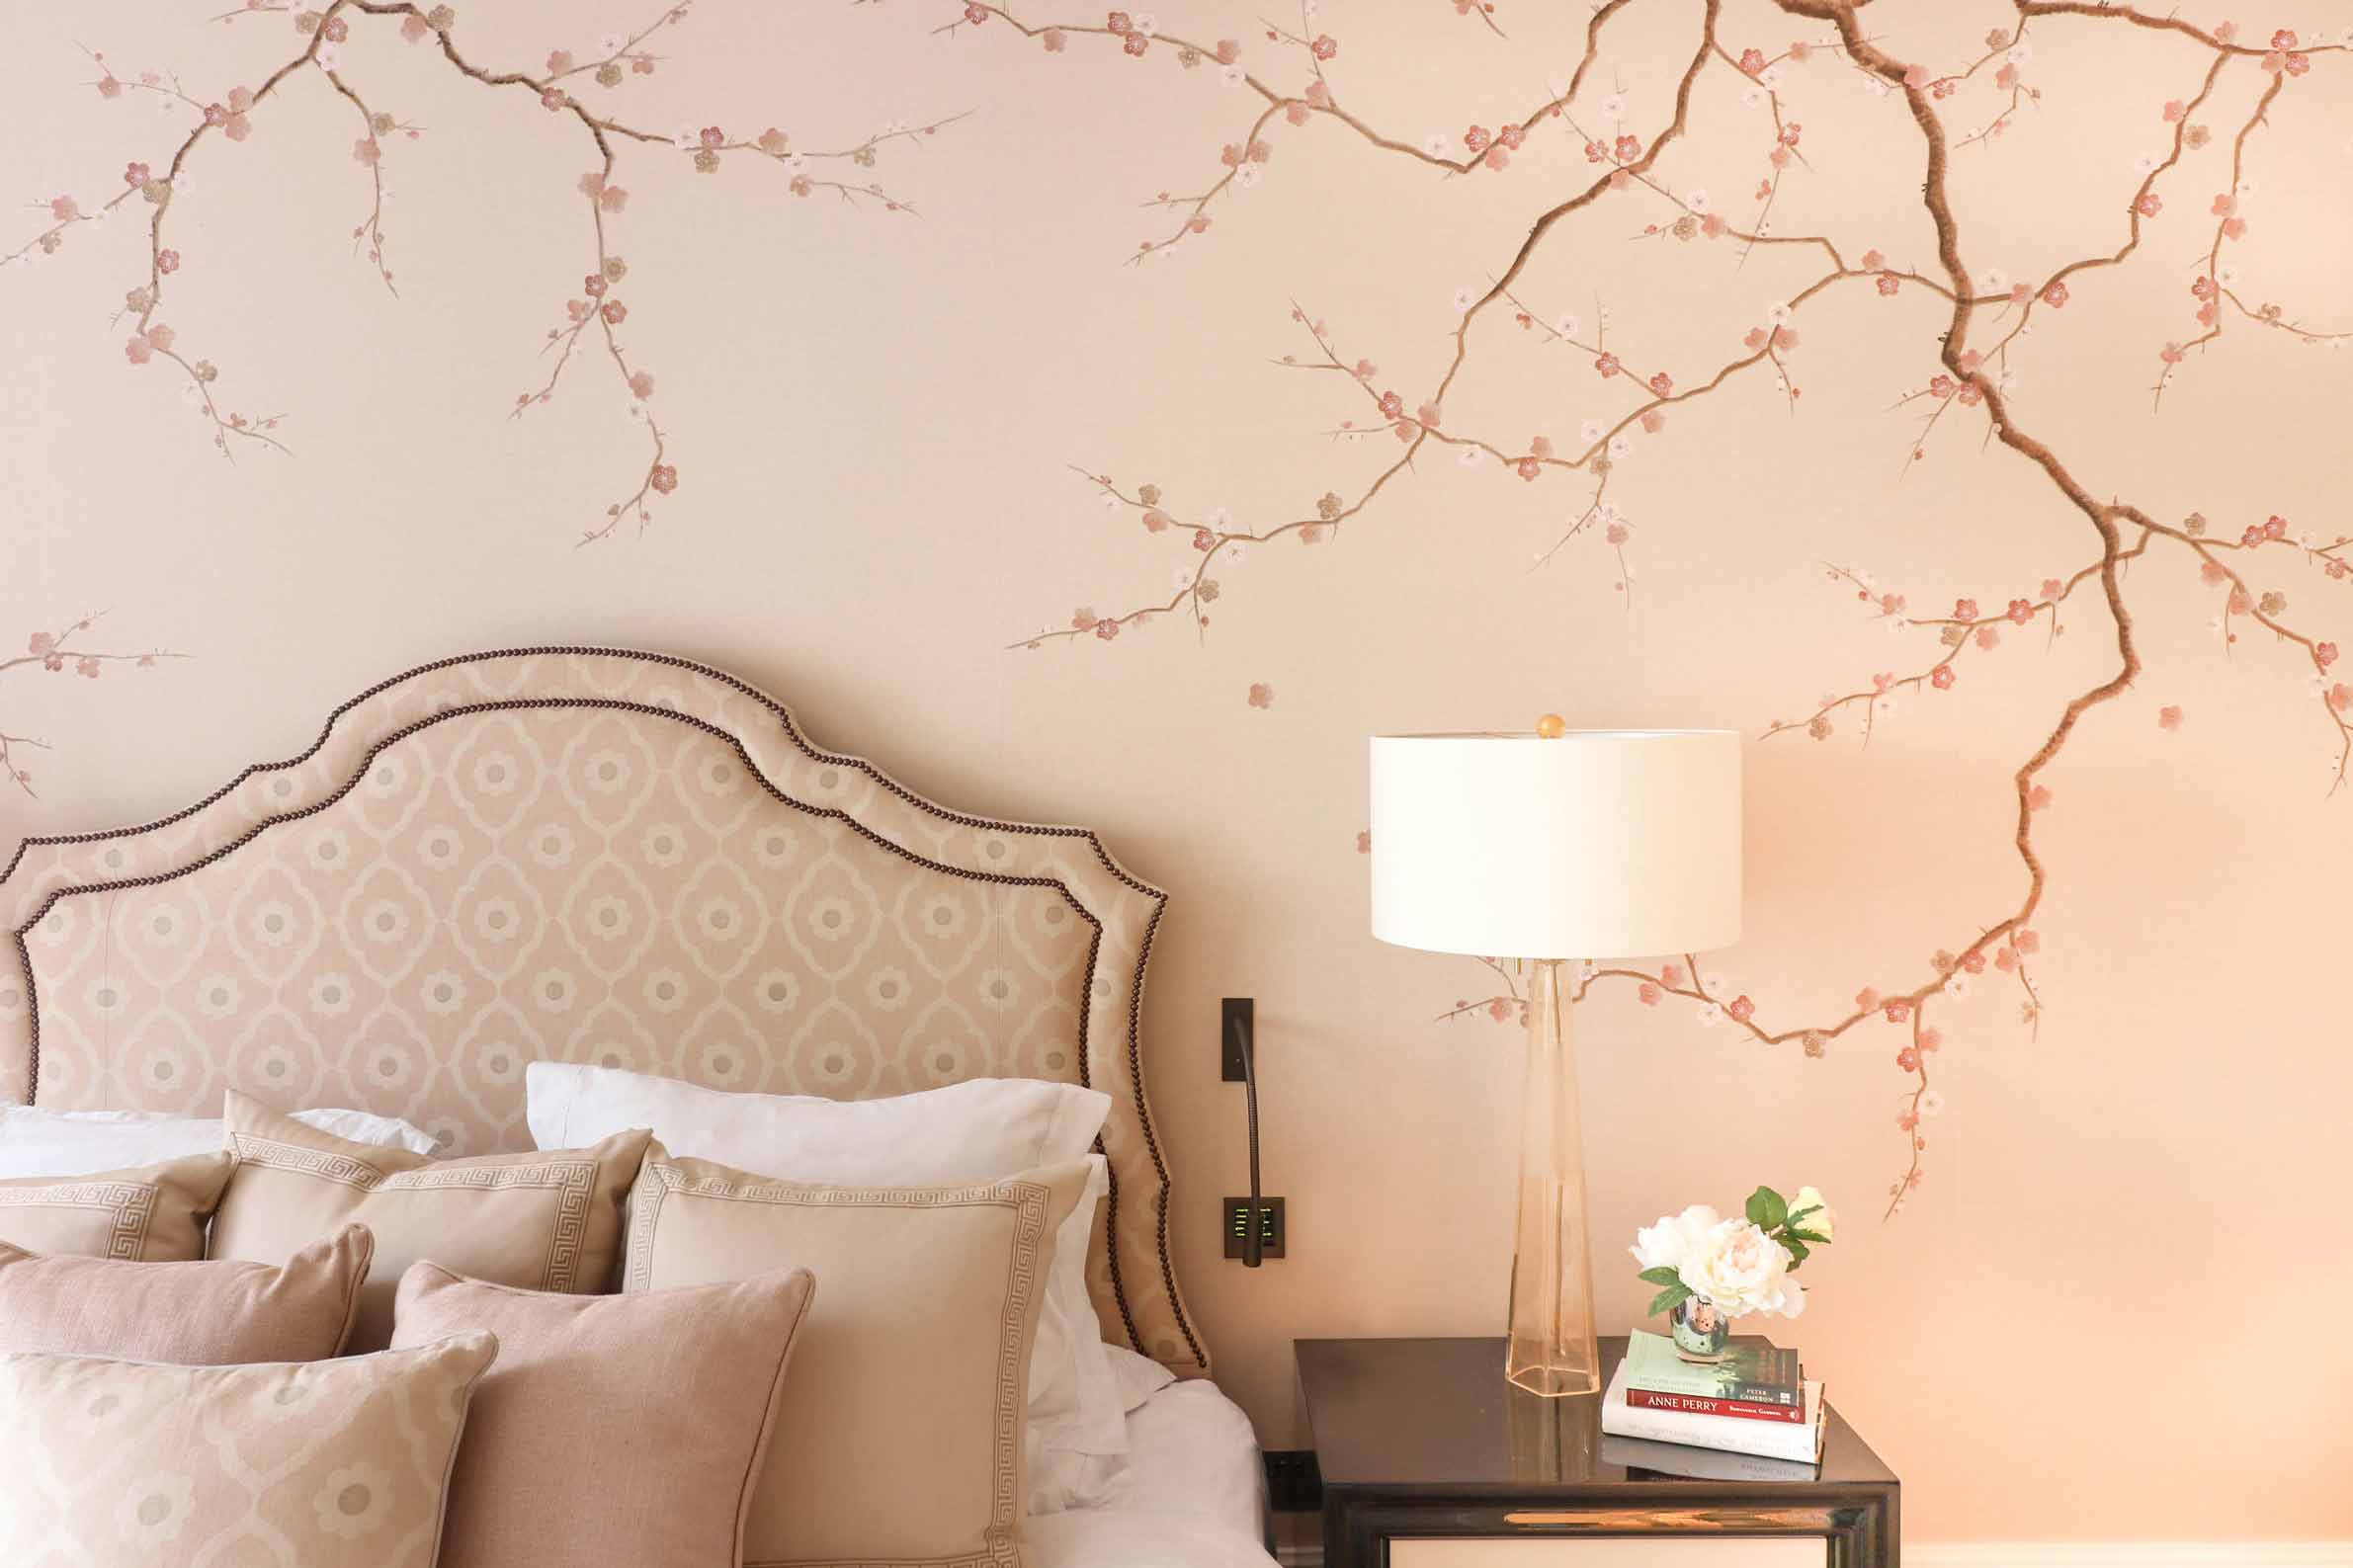 Photograph of a chinoiserie blossom flower mural wall painted by Diane Hill in a neutral toned bedroom